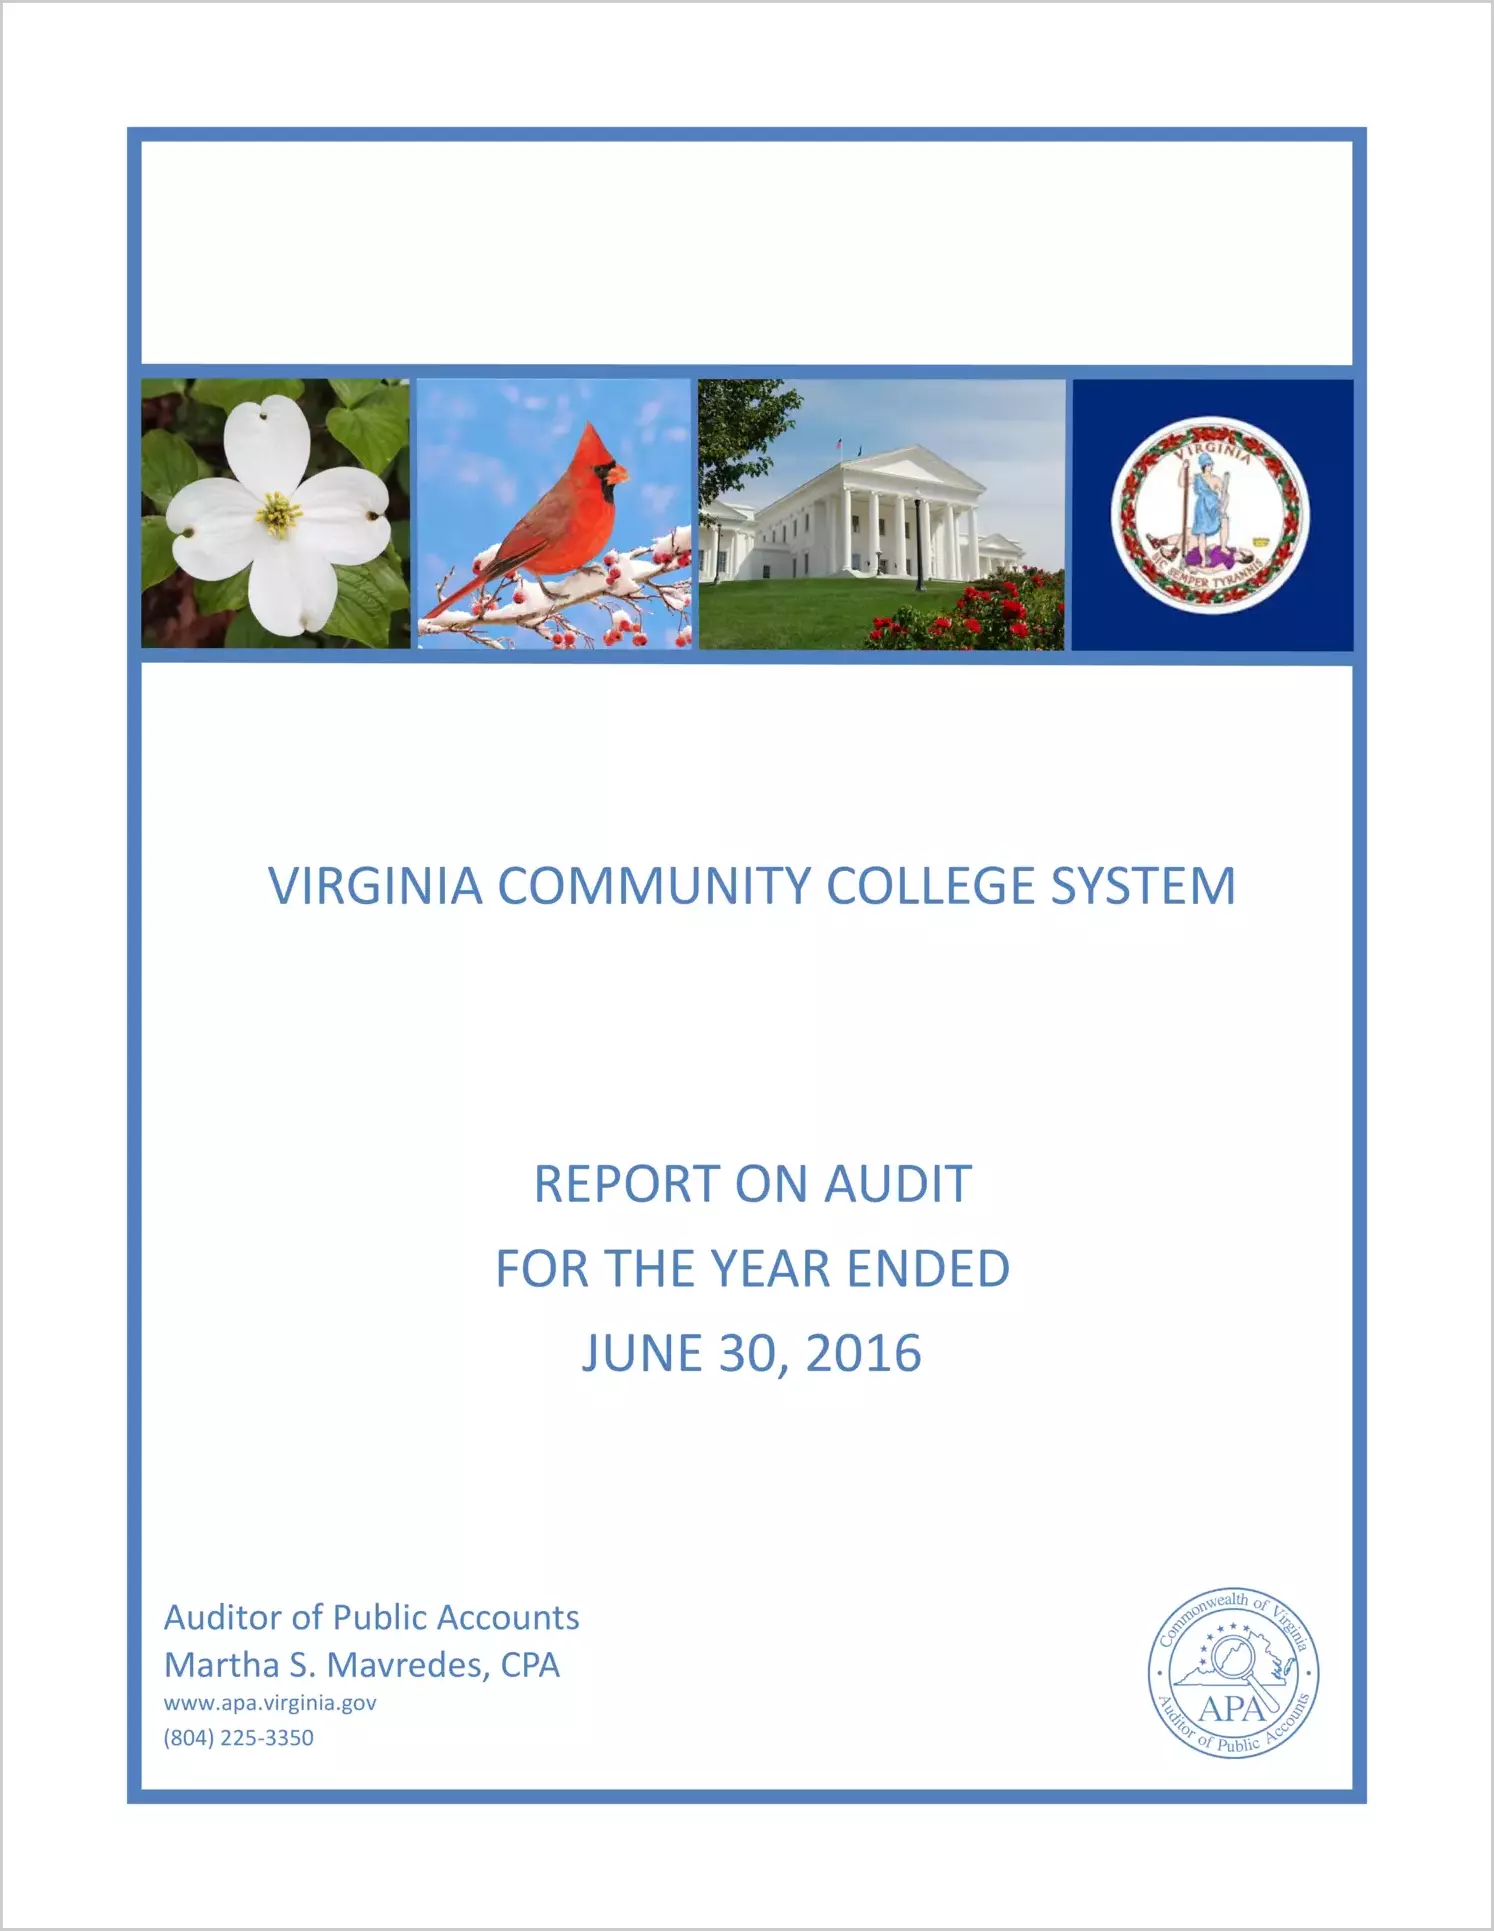 Virginia Community College System for the year ended June 30, 2016